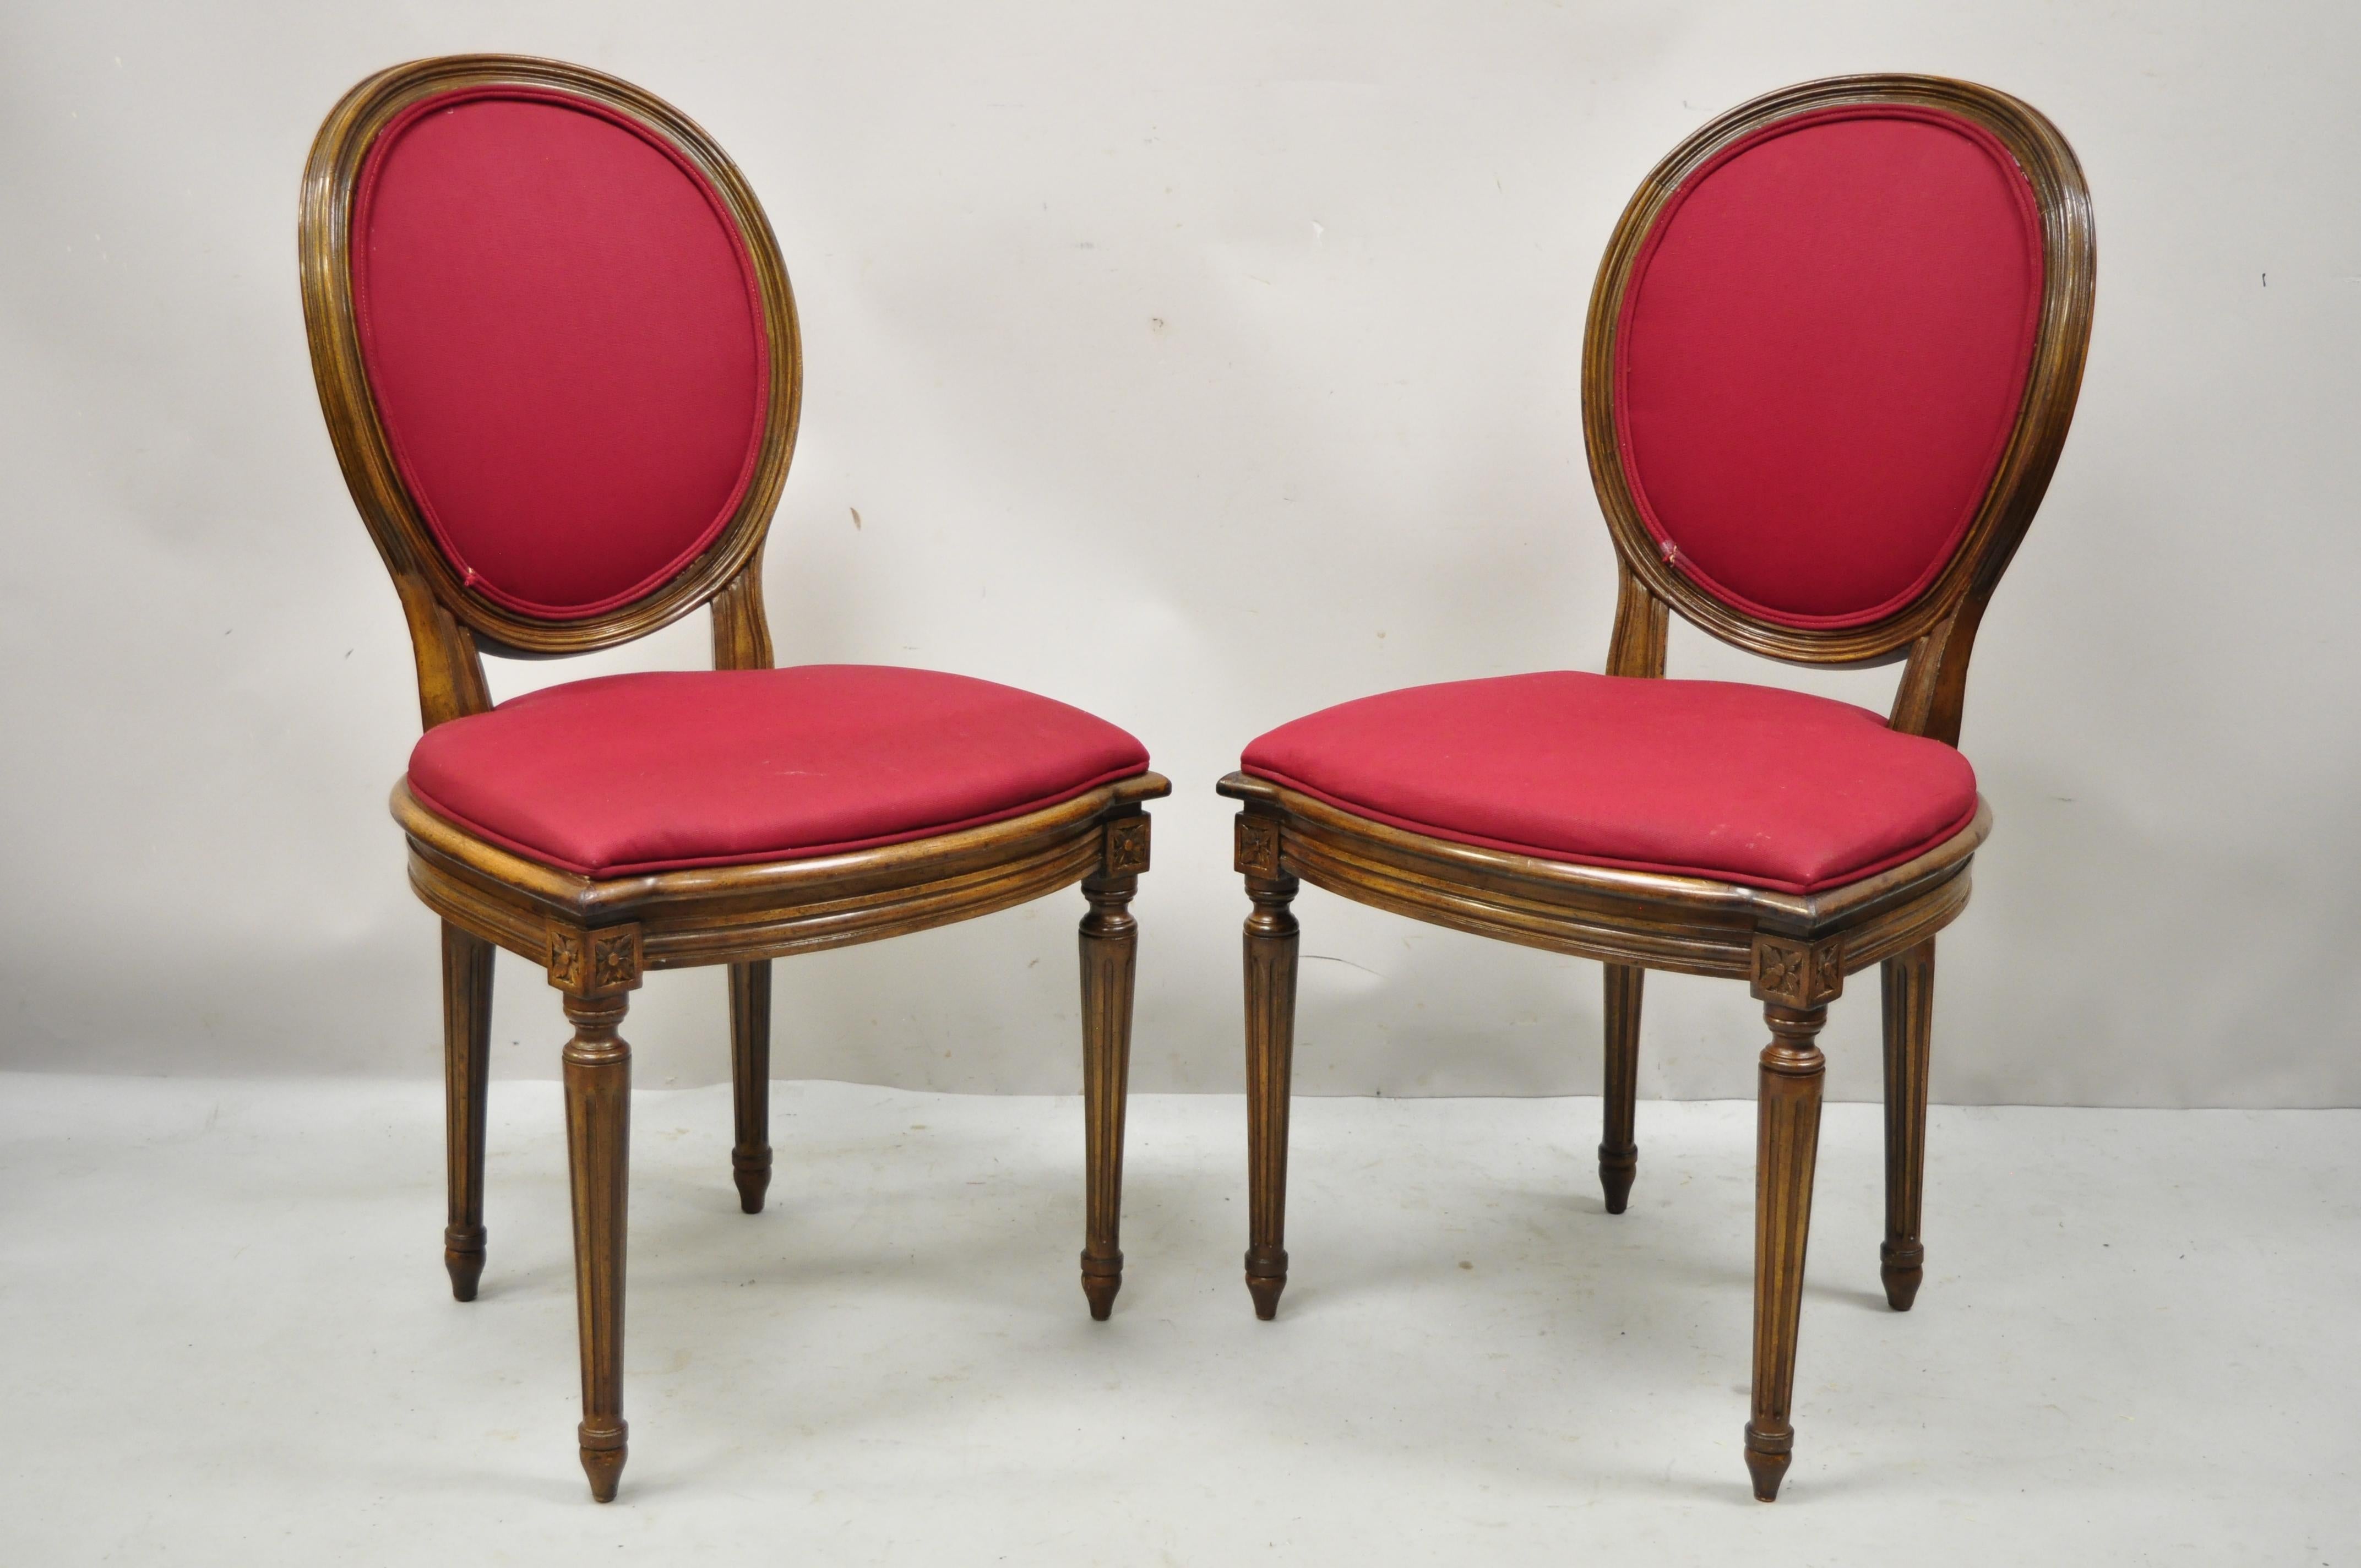 Vintage French Louis XVI Oval Cameo Back Red Dining Room Chairs - Set of 6 3